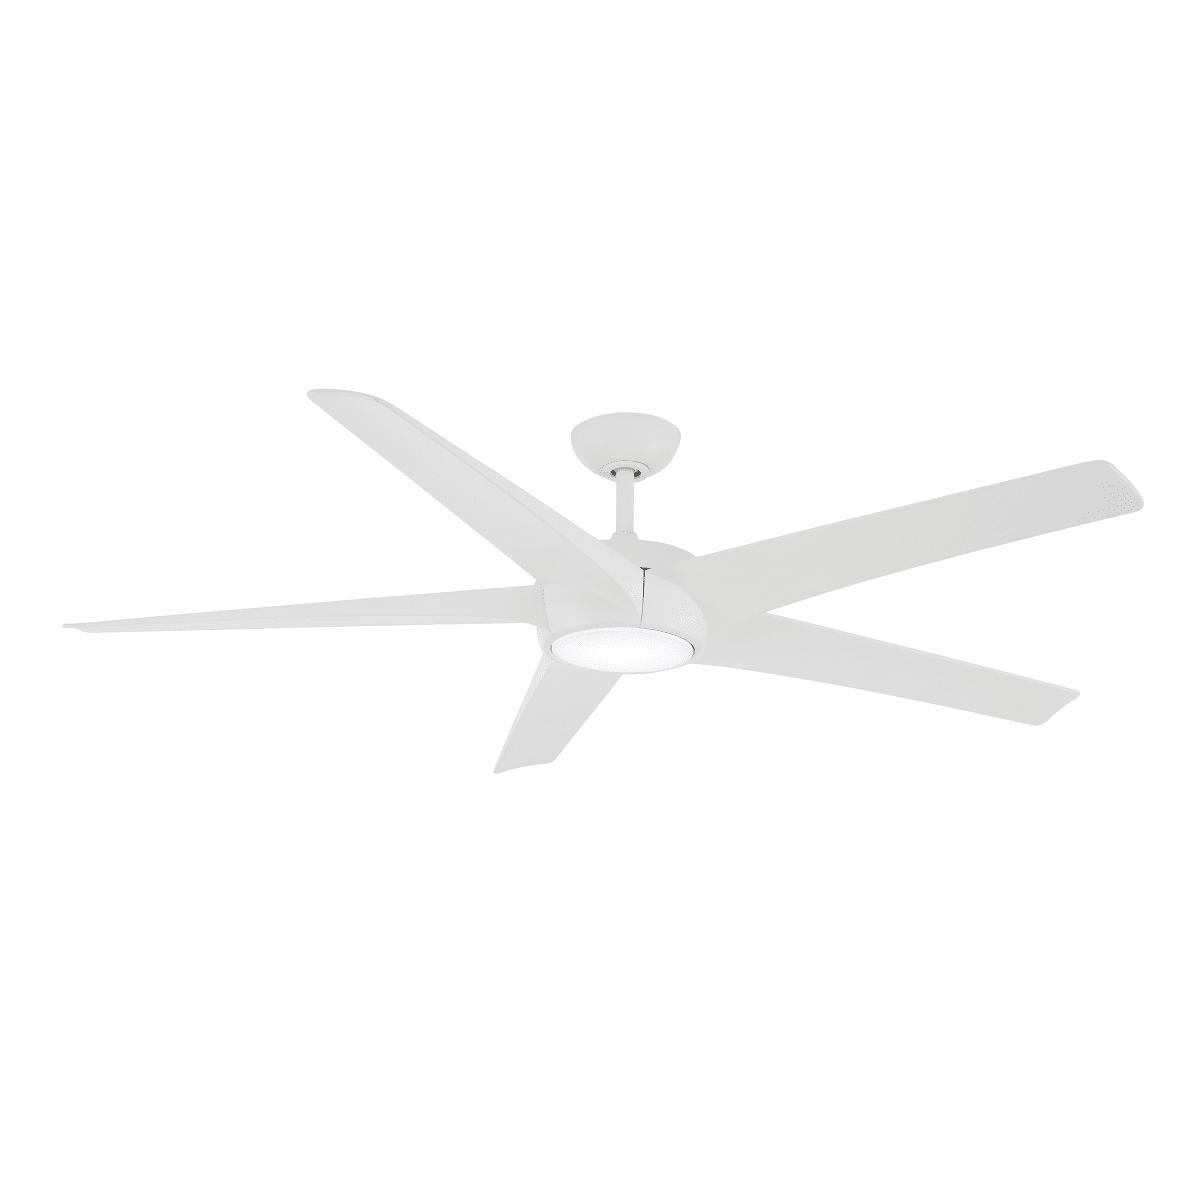 Skymaster 64 Inch LED Ceiling Fan with Light Kit and Remote, Flat White Finish - Bees Lighting